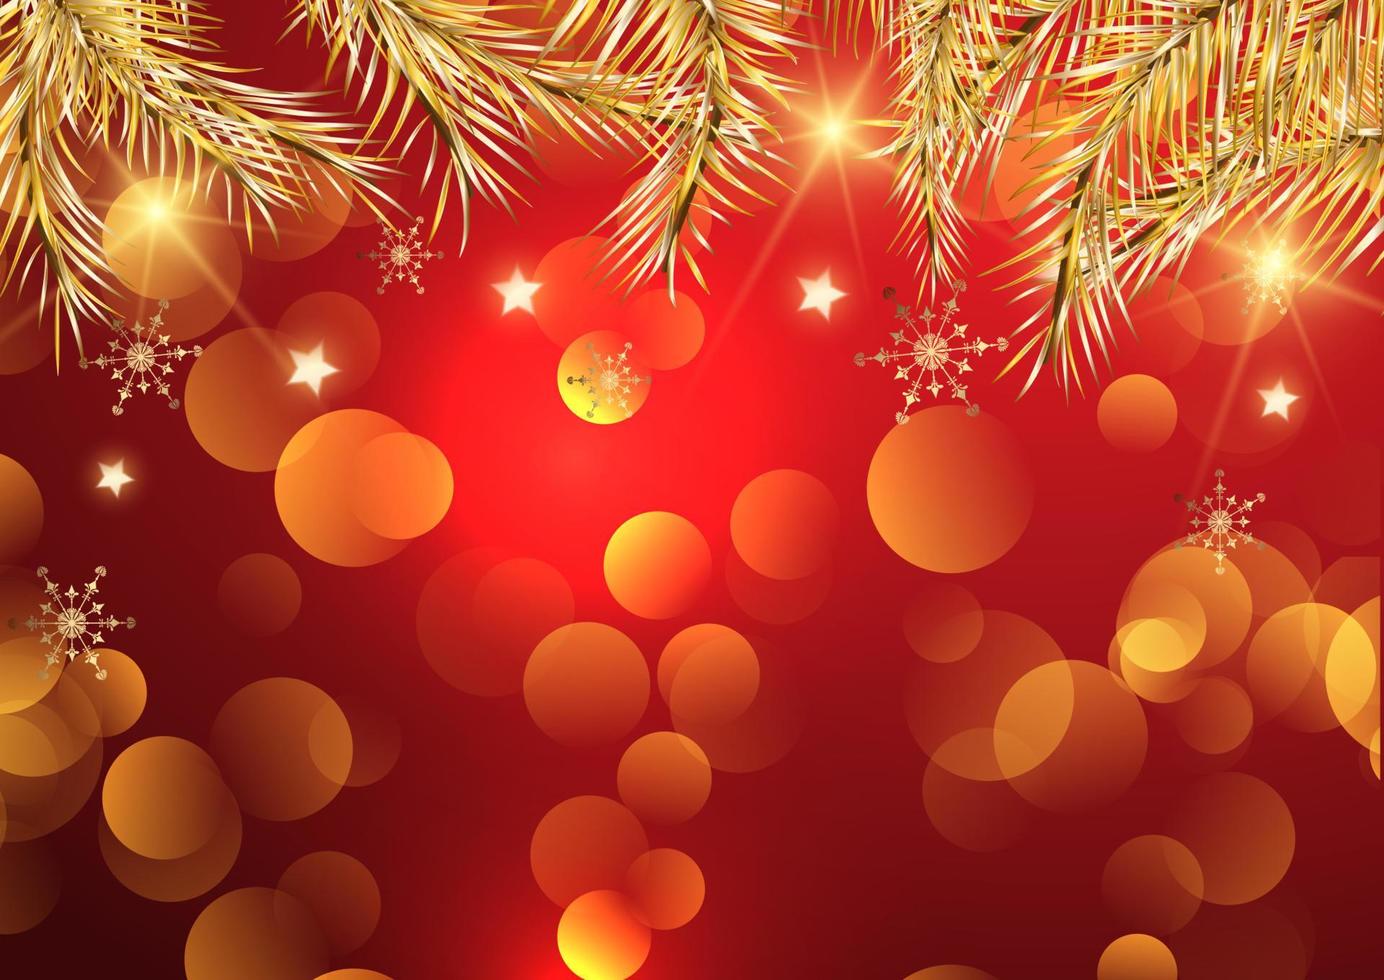 Christmas background with gold fir tree branches vector